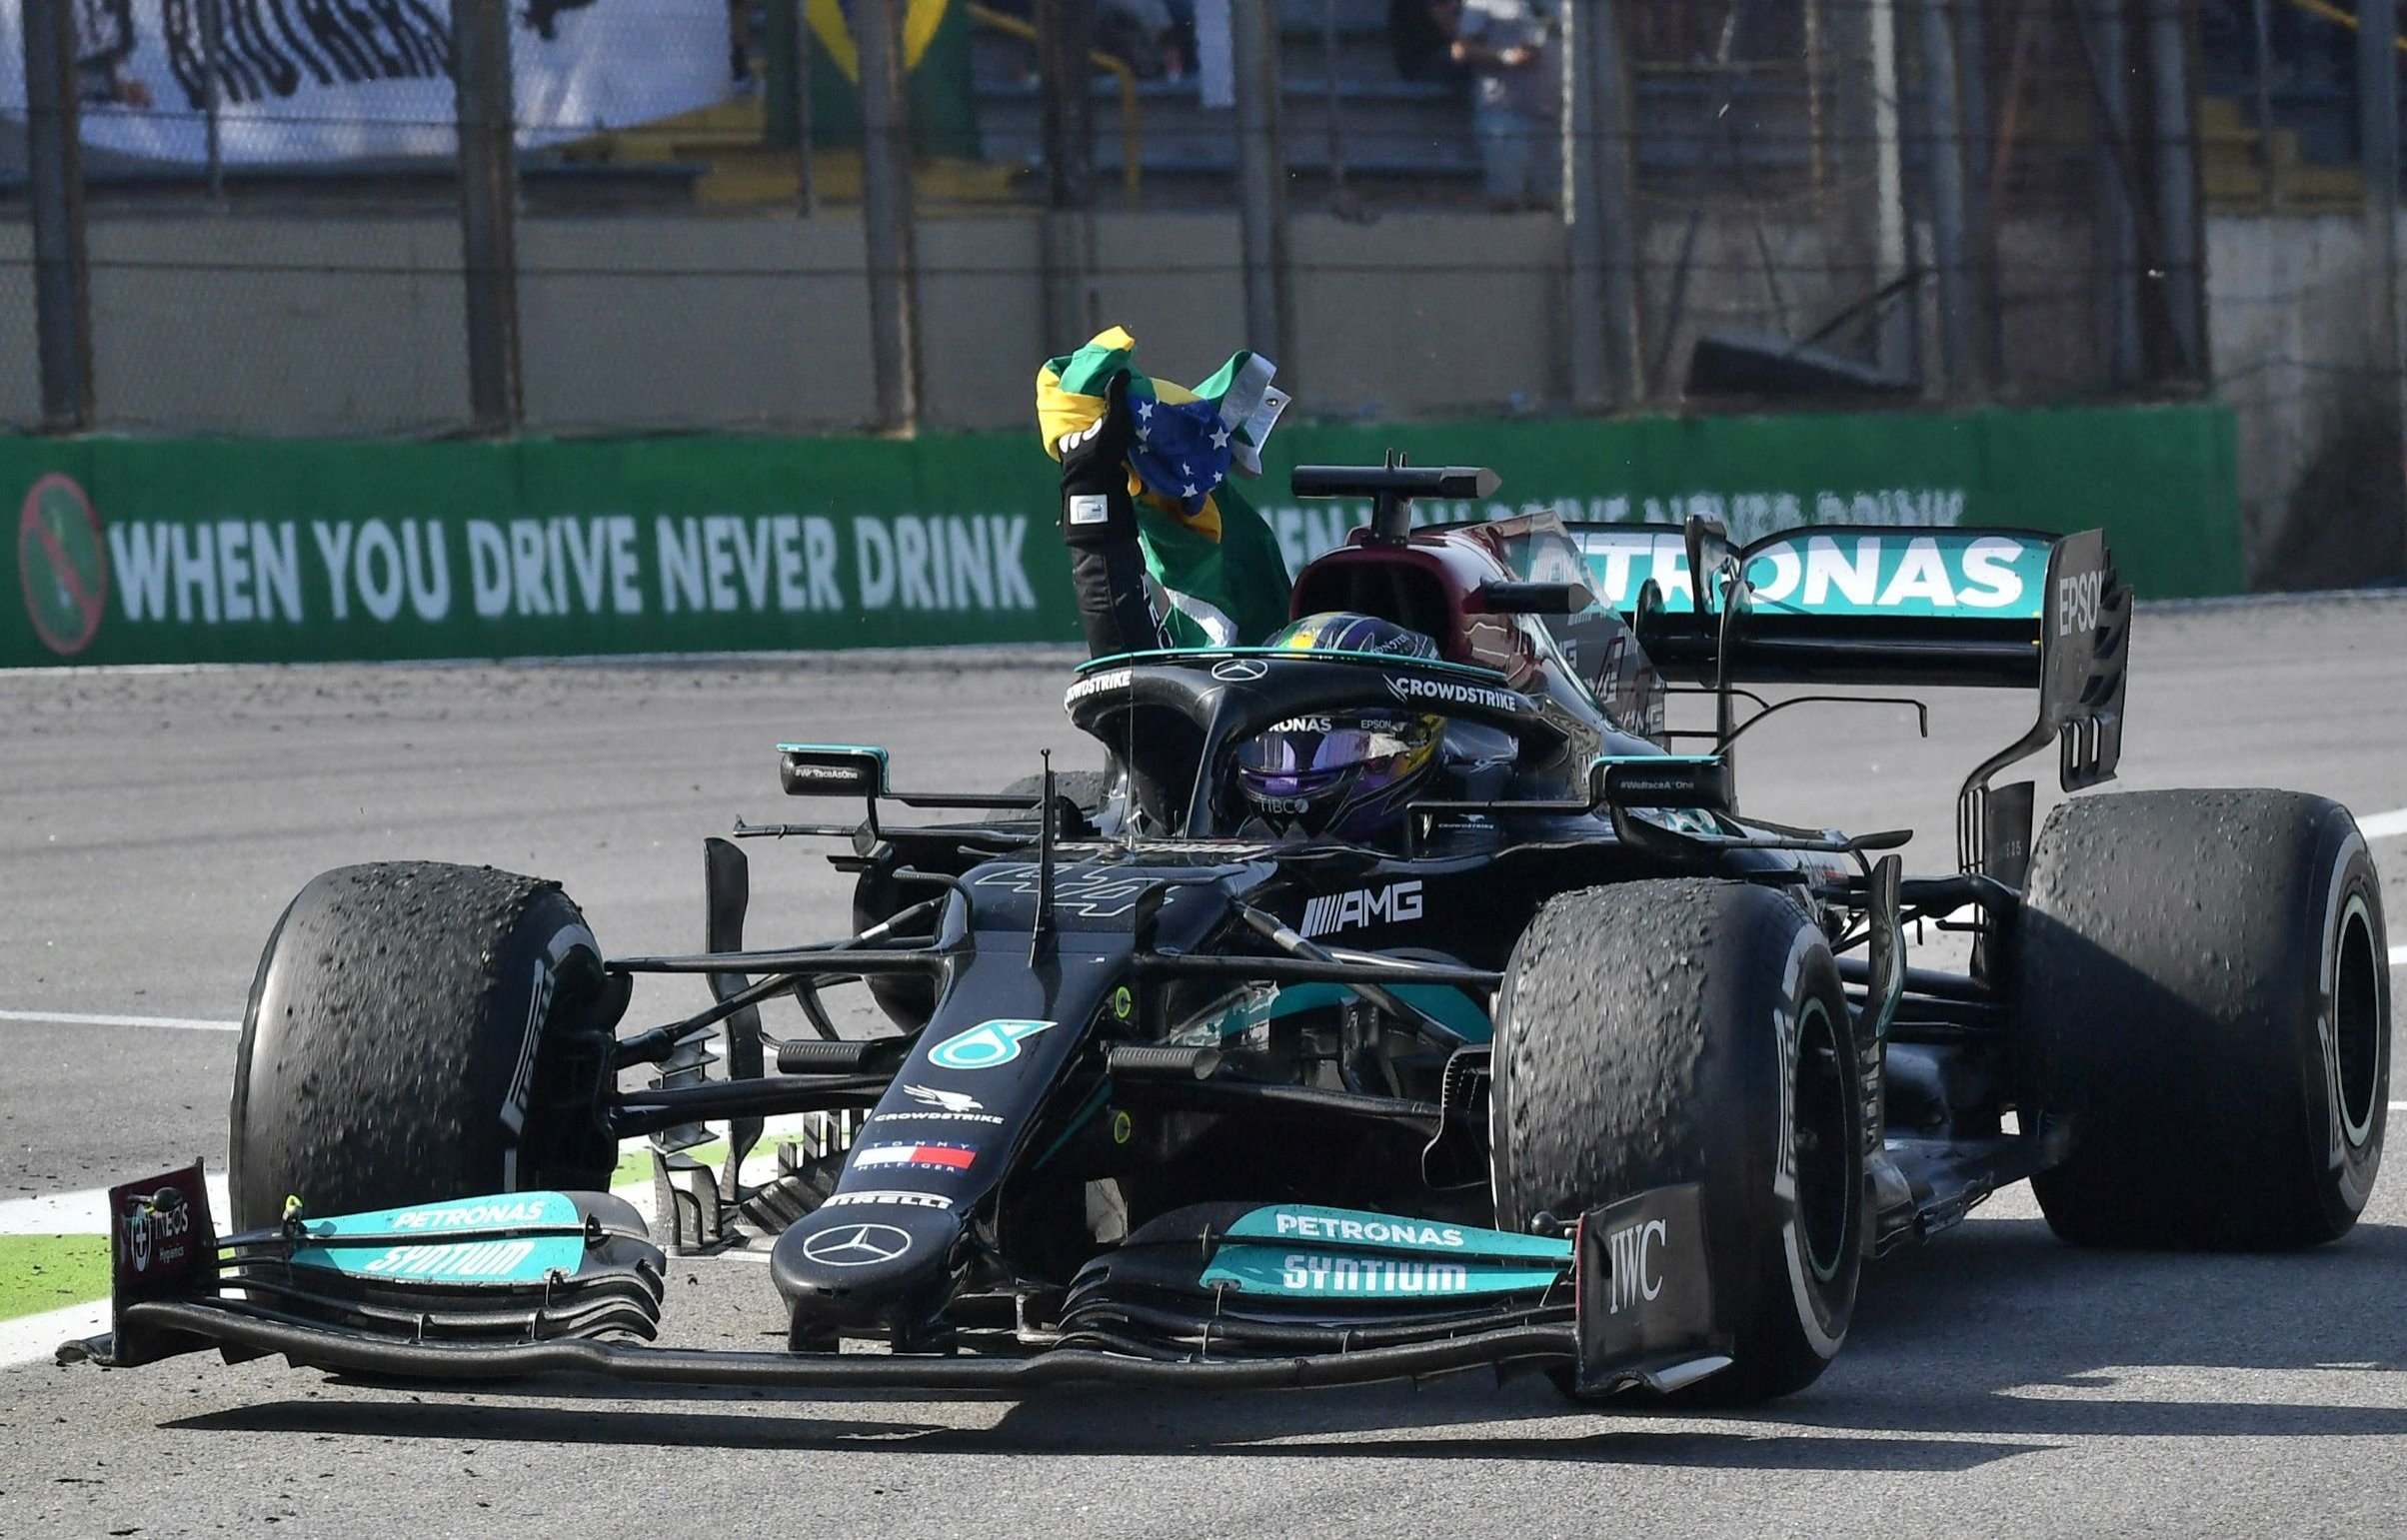 Power makes it 3 straight victories in Sao Paulo